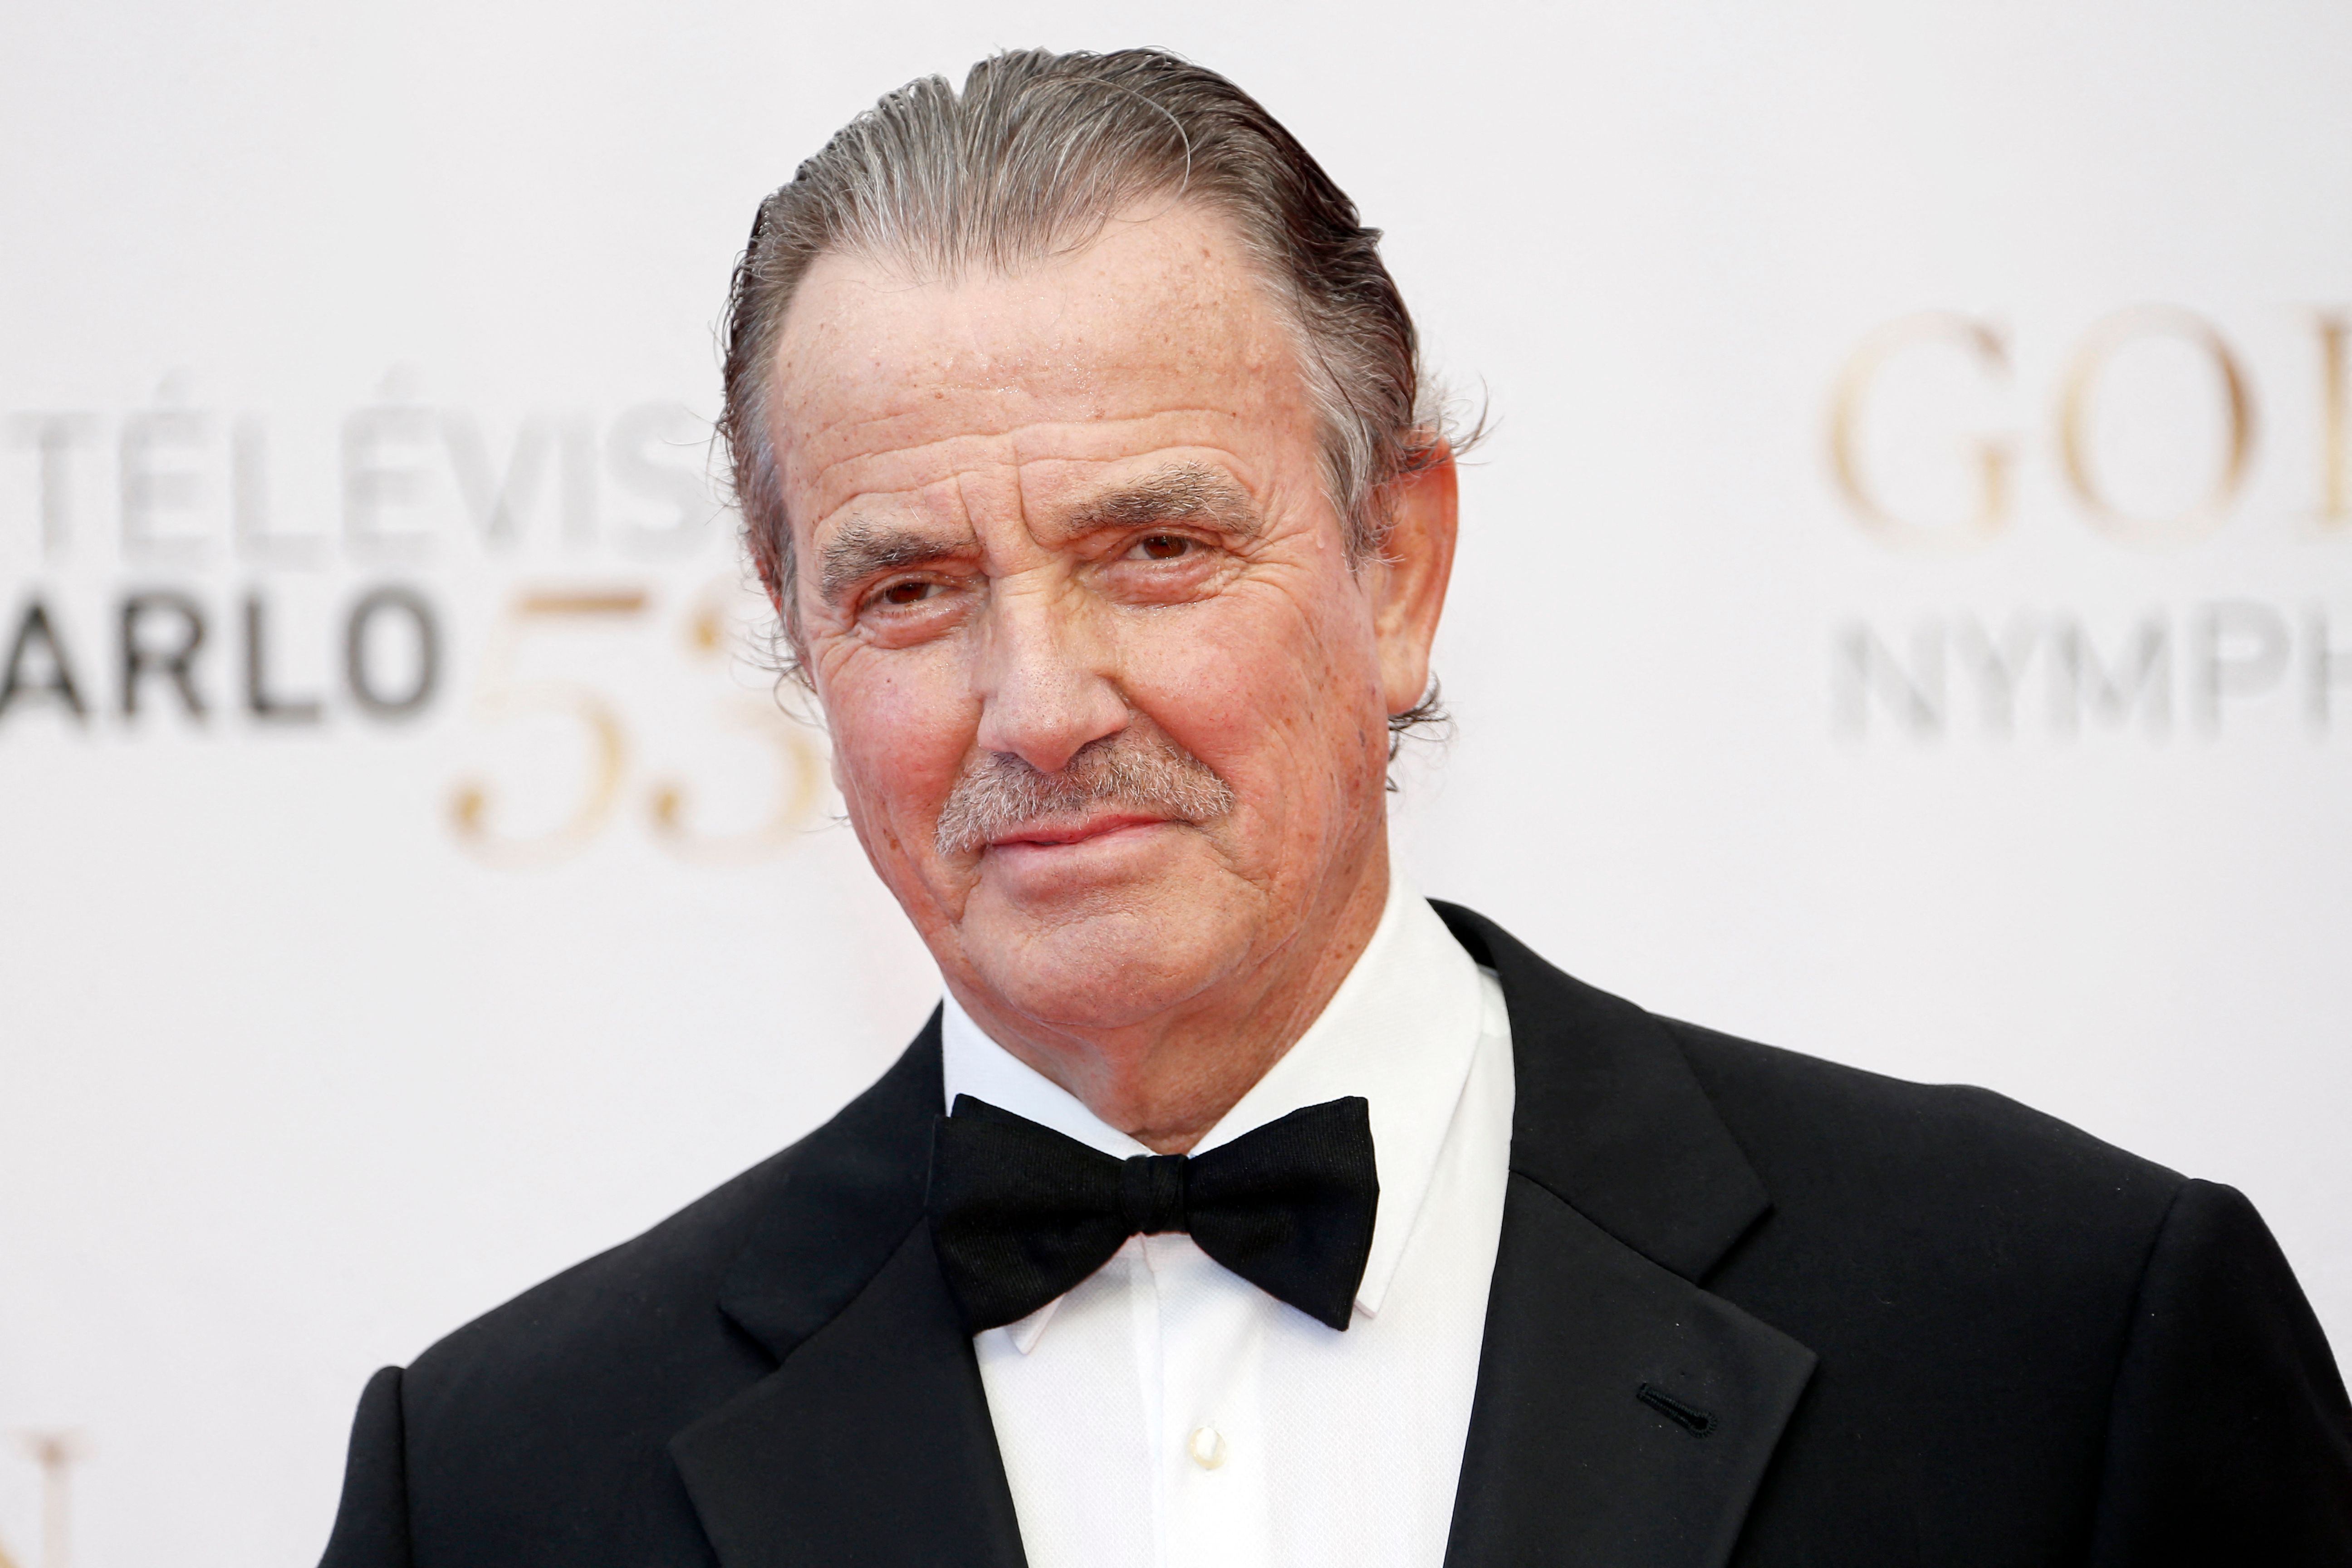 'The Young and the Restless' star Eric Braeden wearing a tuxedo and posing on the red carpet.